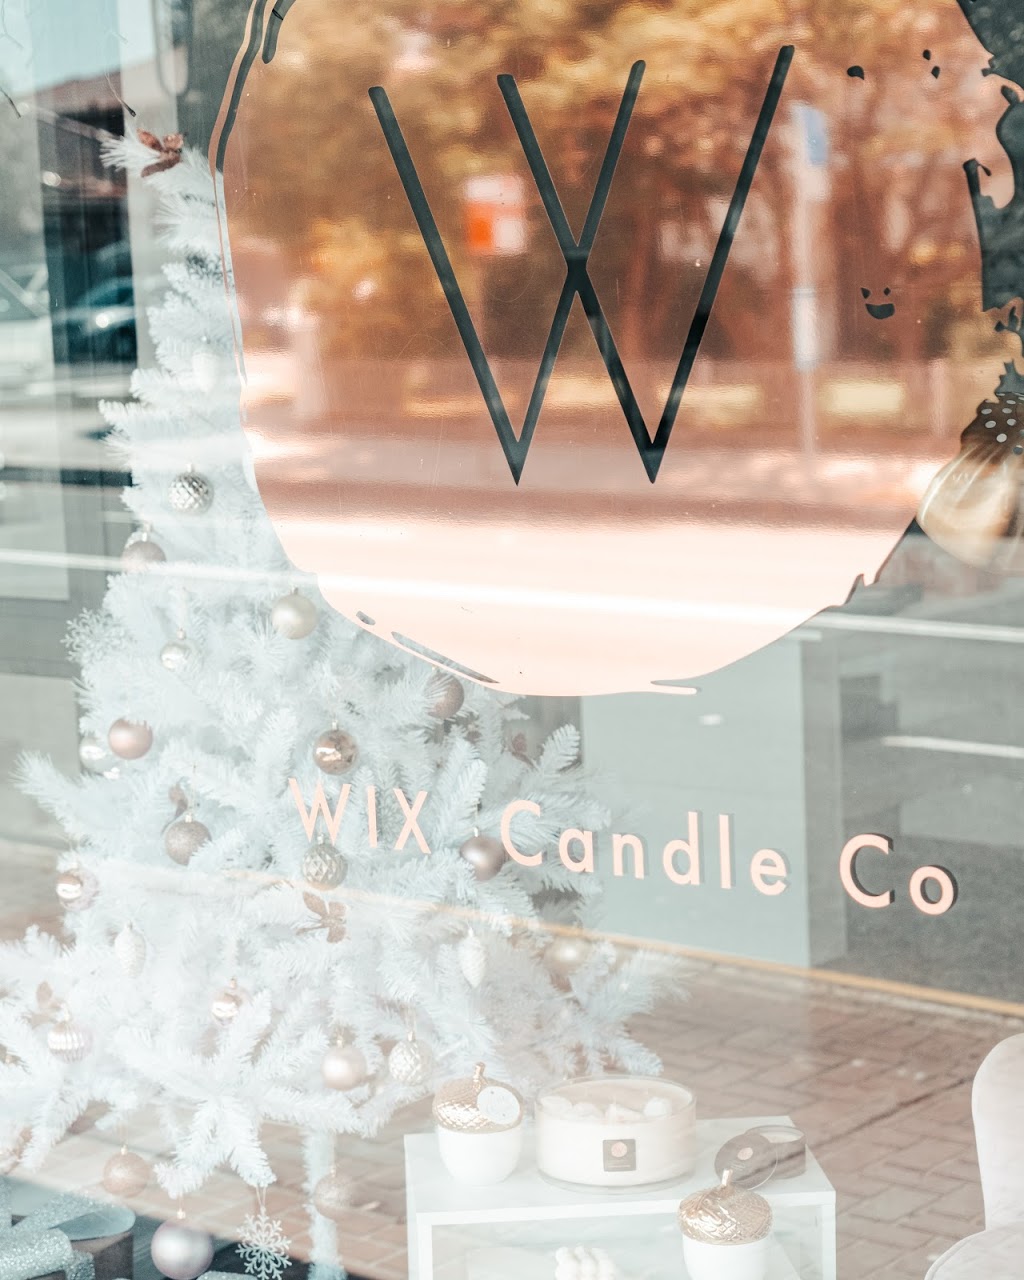 Wix Candle co | Shop 1/242 Rocky Point Rd, Ramsgate NSW 2217, Australia | Phone: 0451 504 837